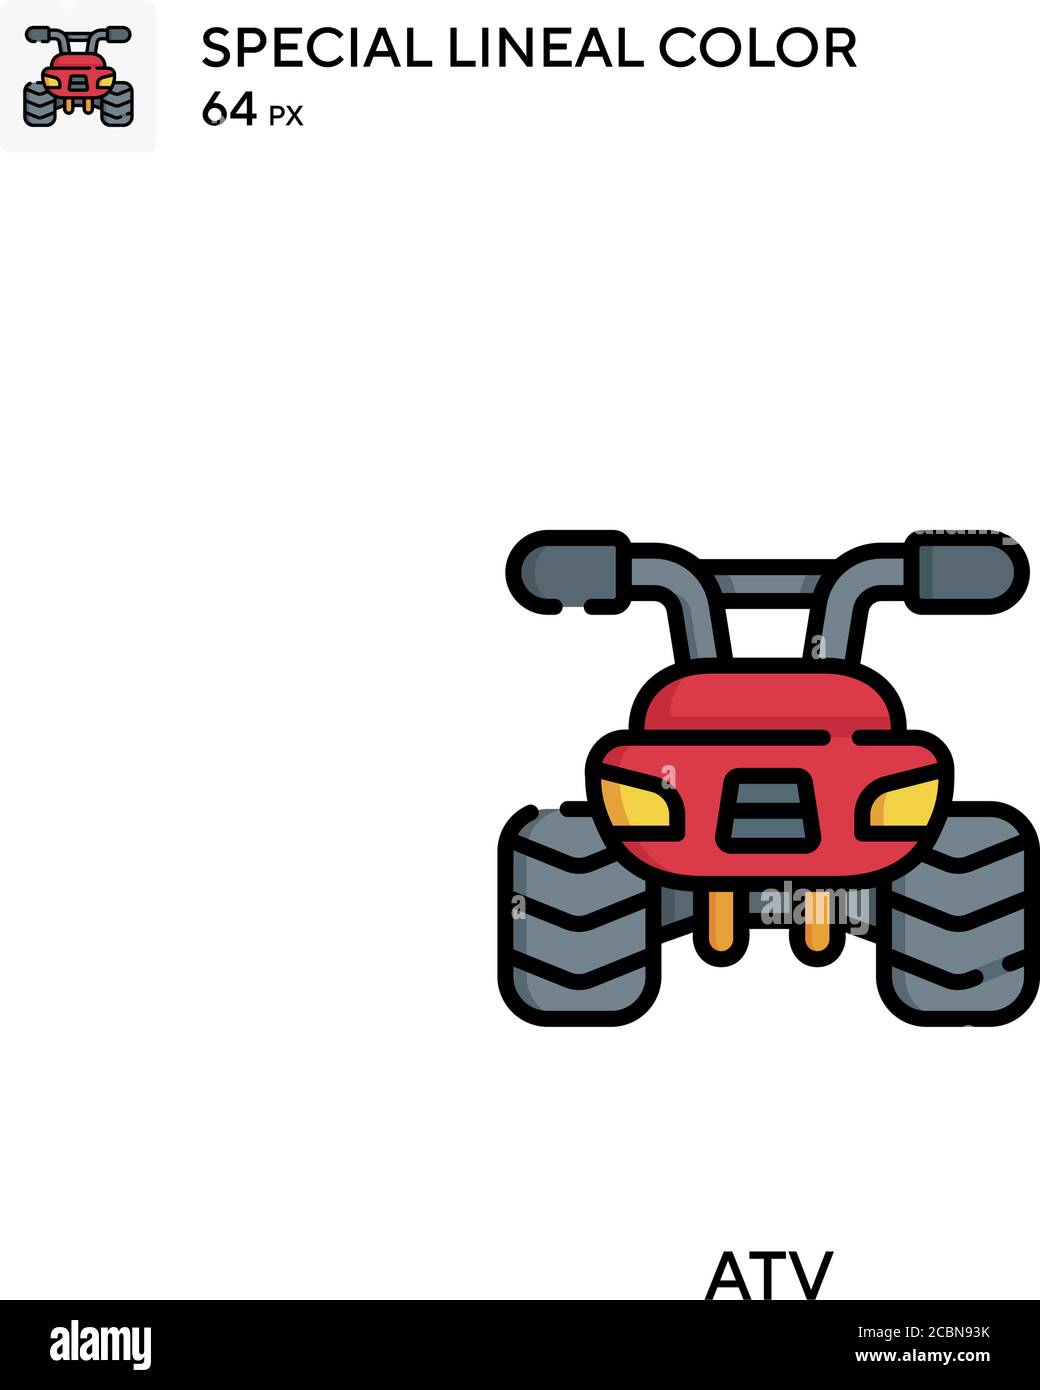 Atv Special lineal color vector icon. Atv icons for your business project Stock Vector